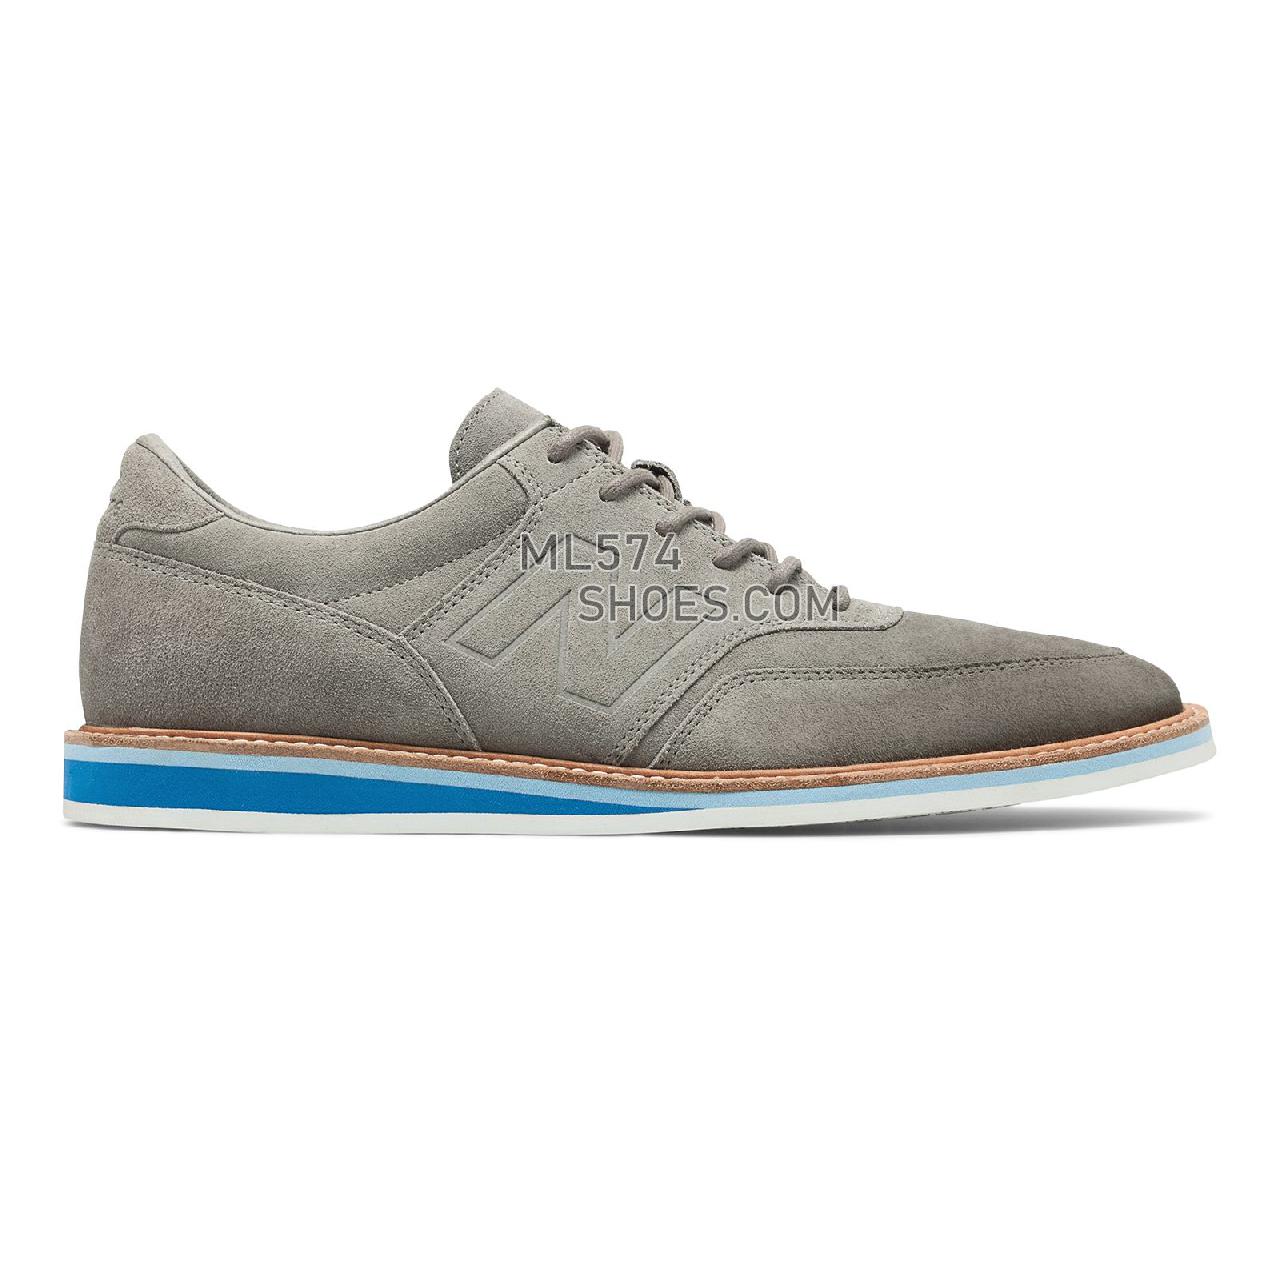 New Balance 1100 - Men's 1100 - Walking Grey with Blue - MD1100GY